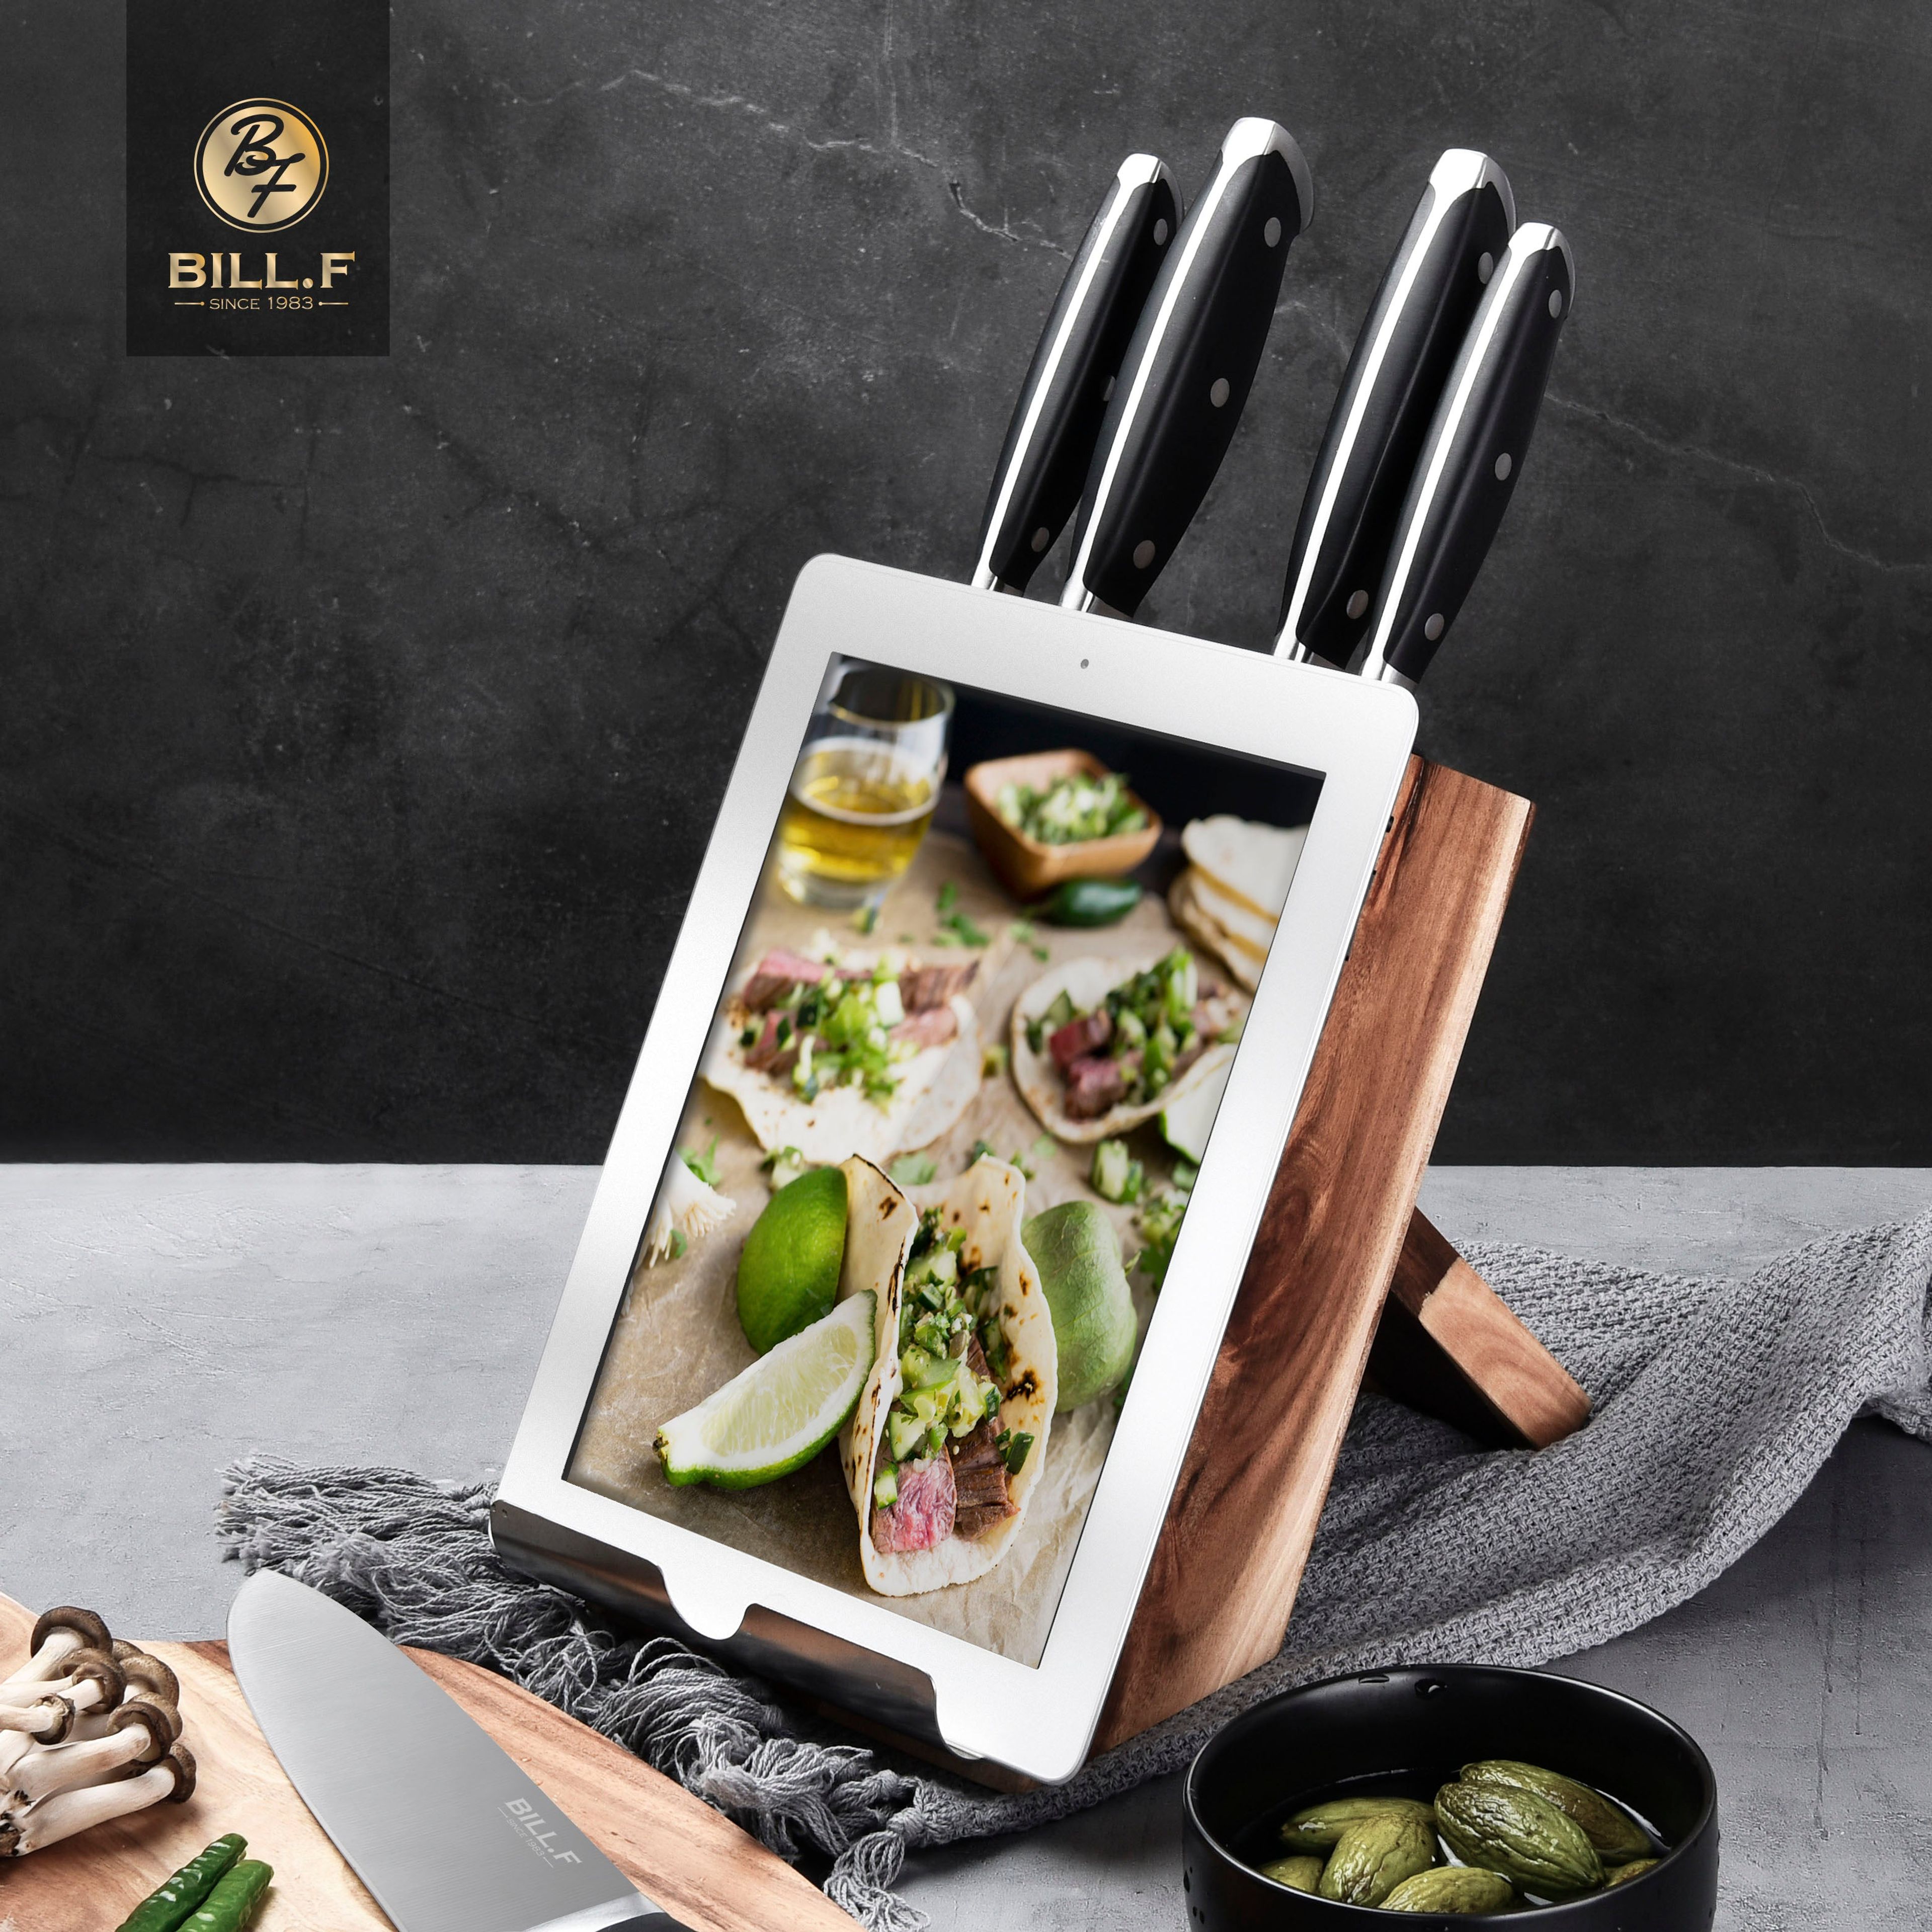 Buy 1 get 1 FREE - Bill.F 6 Pieces Knife Block Set With Tablet/Cookbook Stand